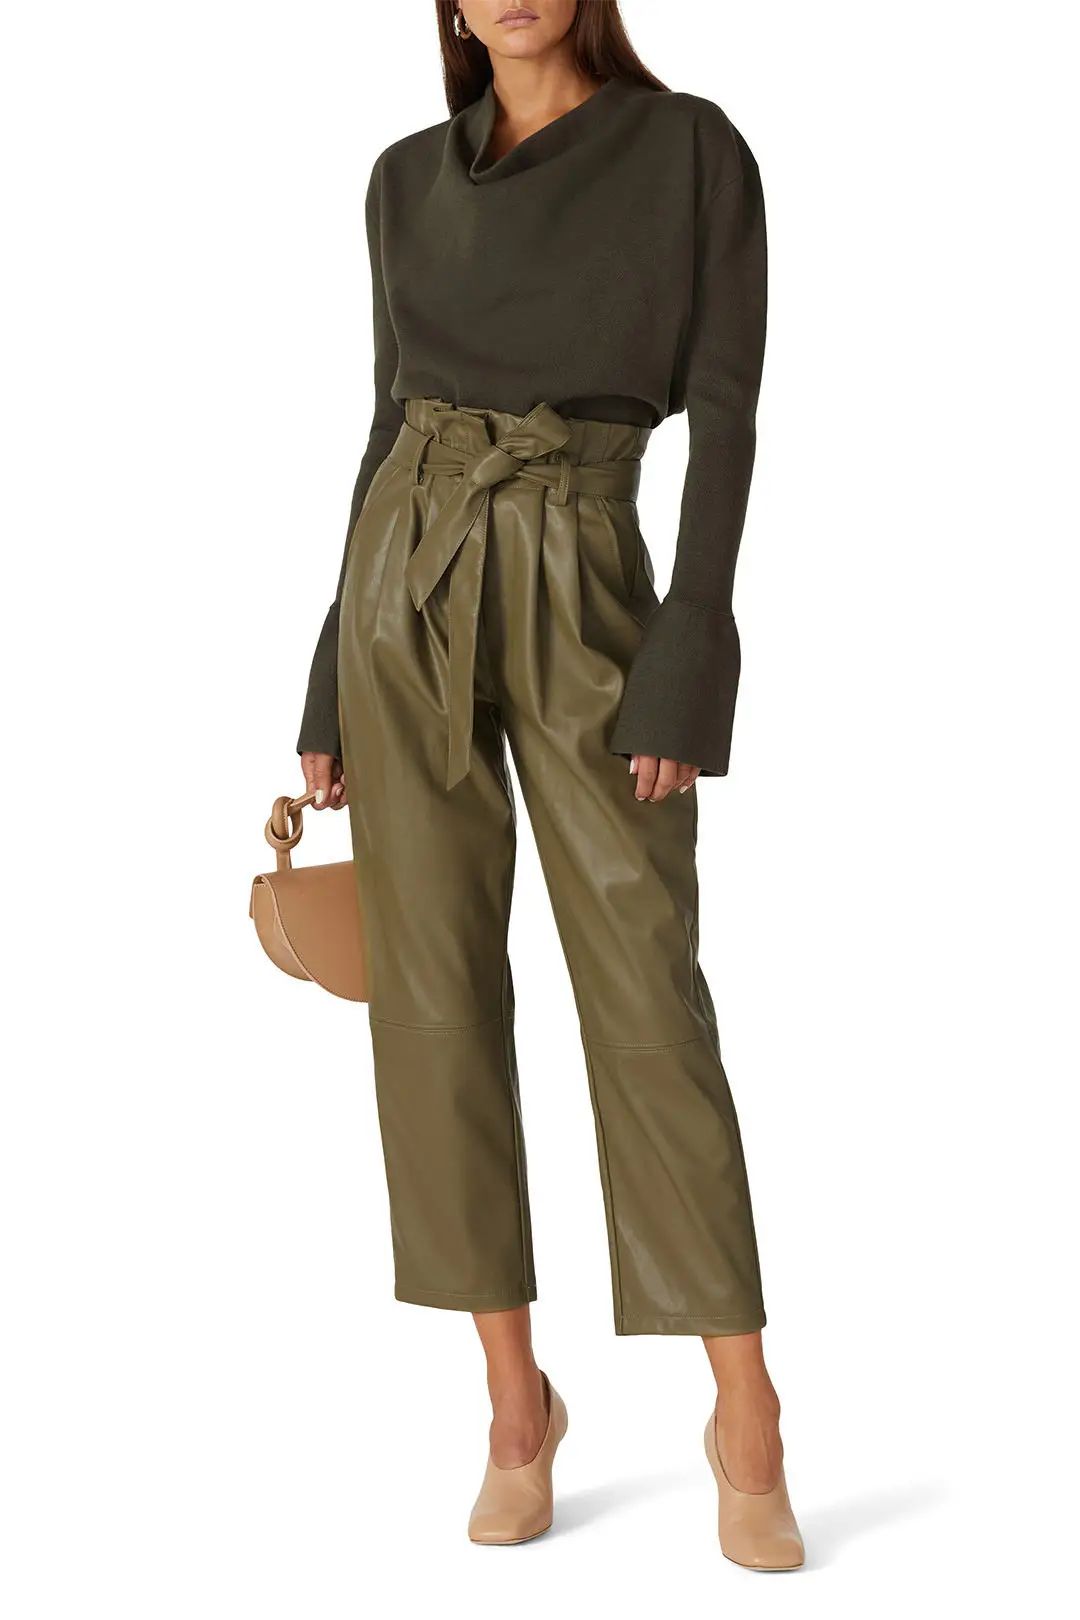 Love, Whit by Whitney Port Olive Faux Leather Pants | Rent The Runway